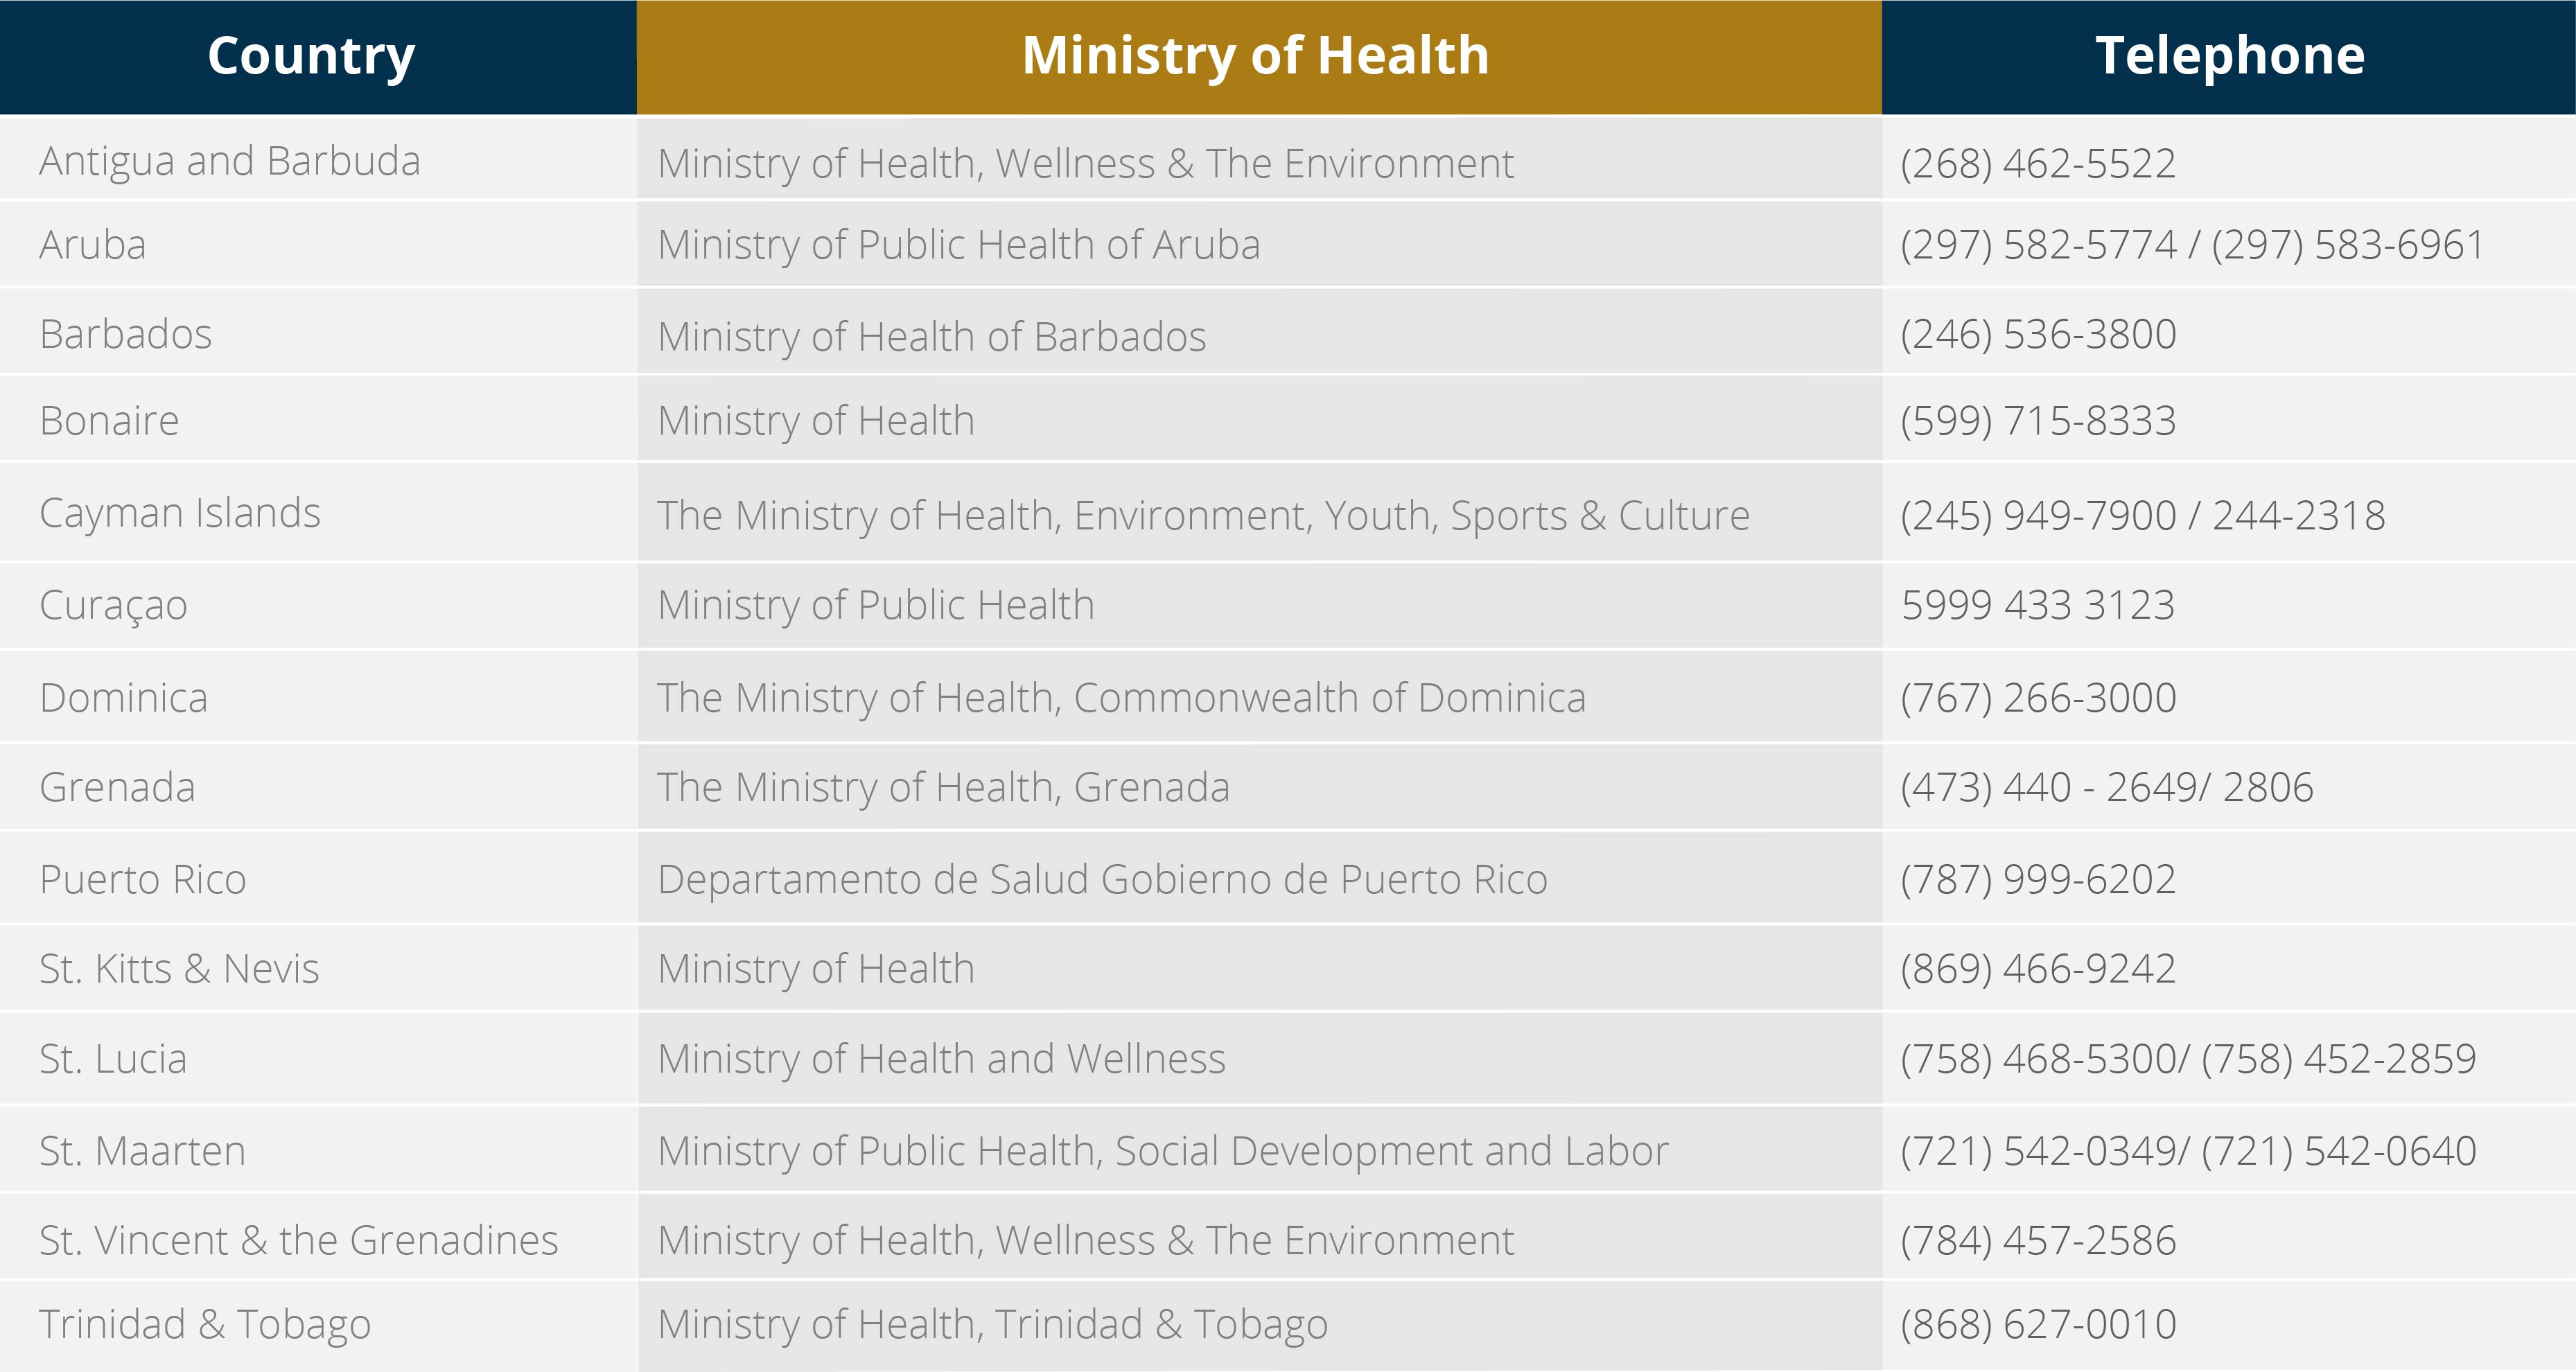 Caribbean Ministries of Health by country and their respective contact telephone number